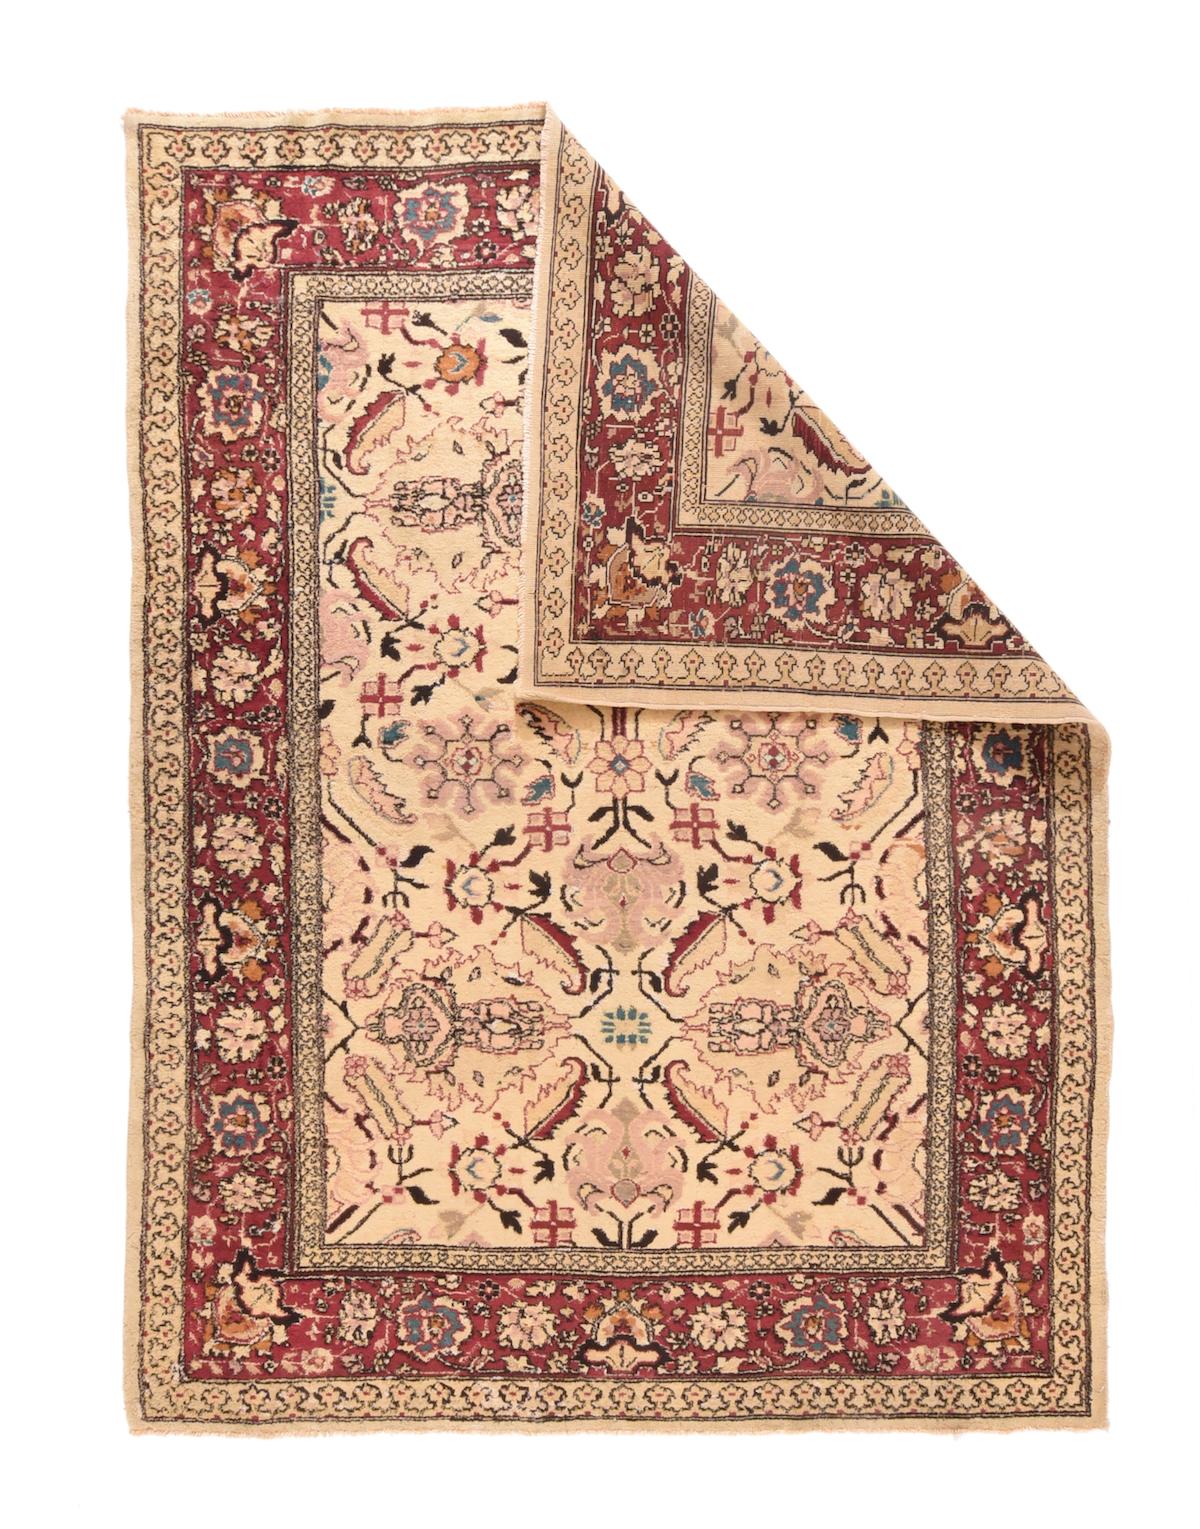 Fine Antique Agra Rug 6' x 7'9''. The sandy straw field shows a vertical double repeat of palmette crosses centred on small rosettes and a slightly larger rosette. Small octogrammes with radiating 